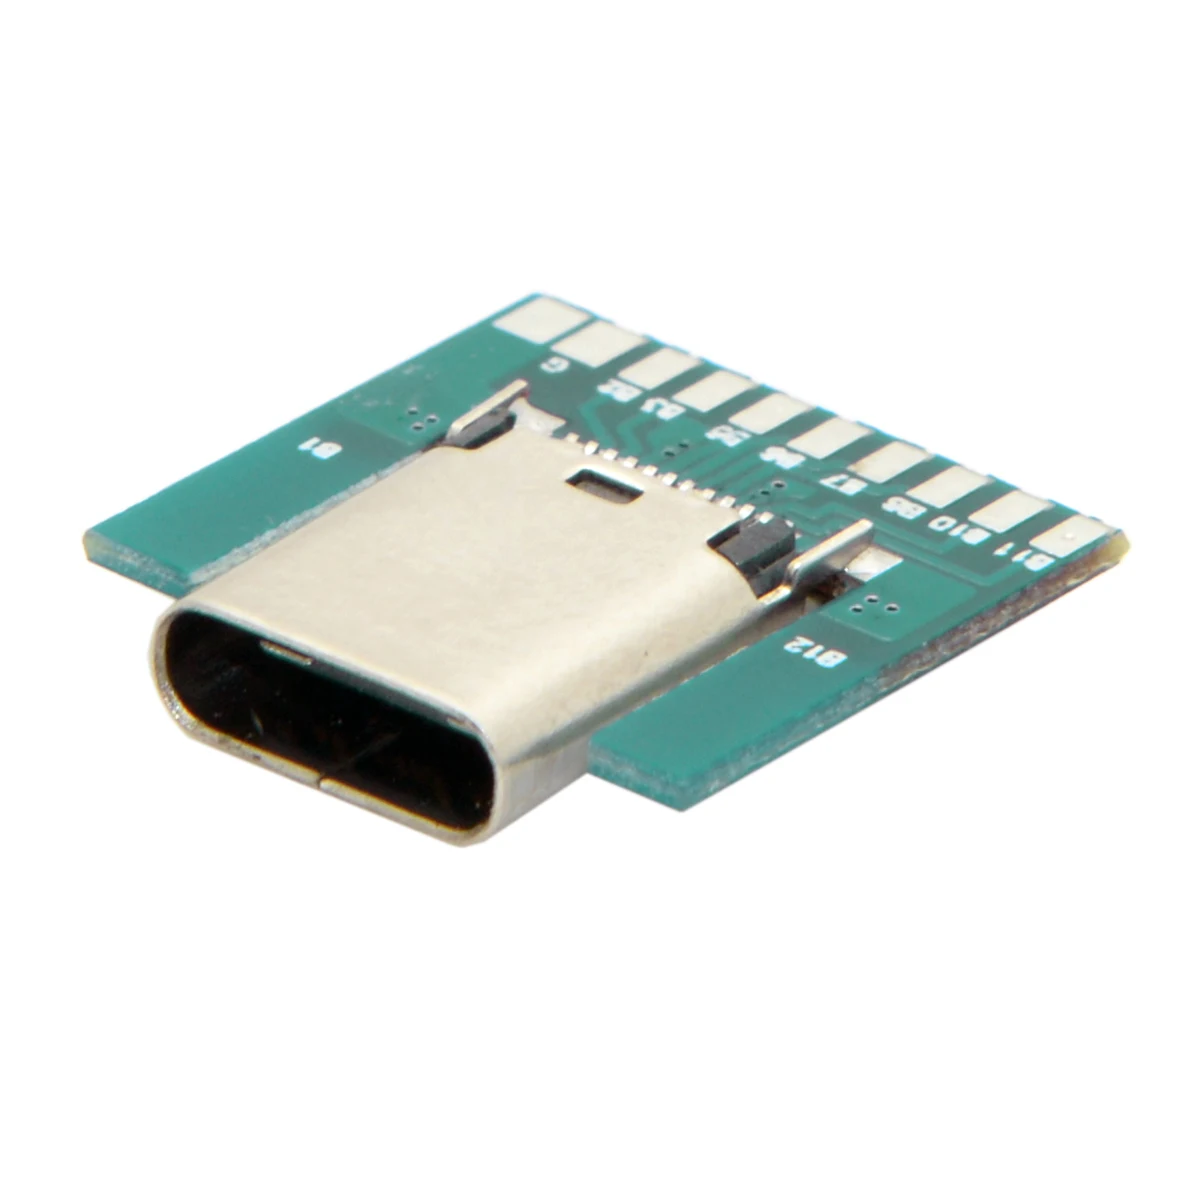 

Chenyang DIY 24pin USB 3.1 Type C Female Socket SMT Type Connector with PC Board